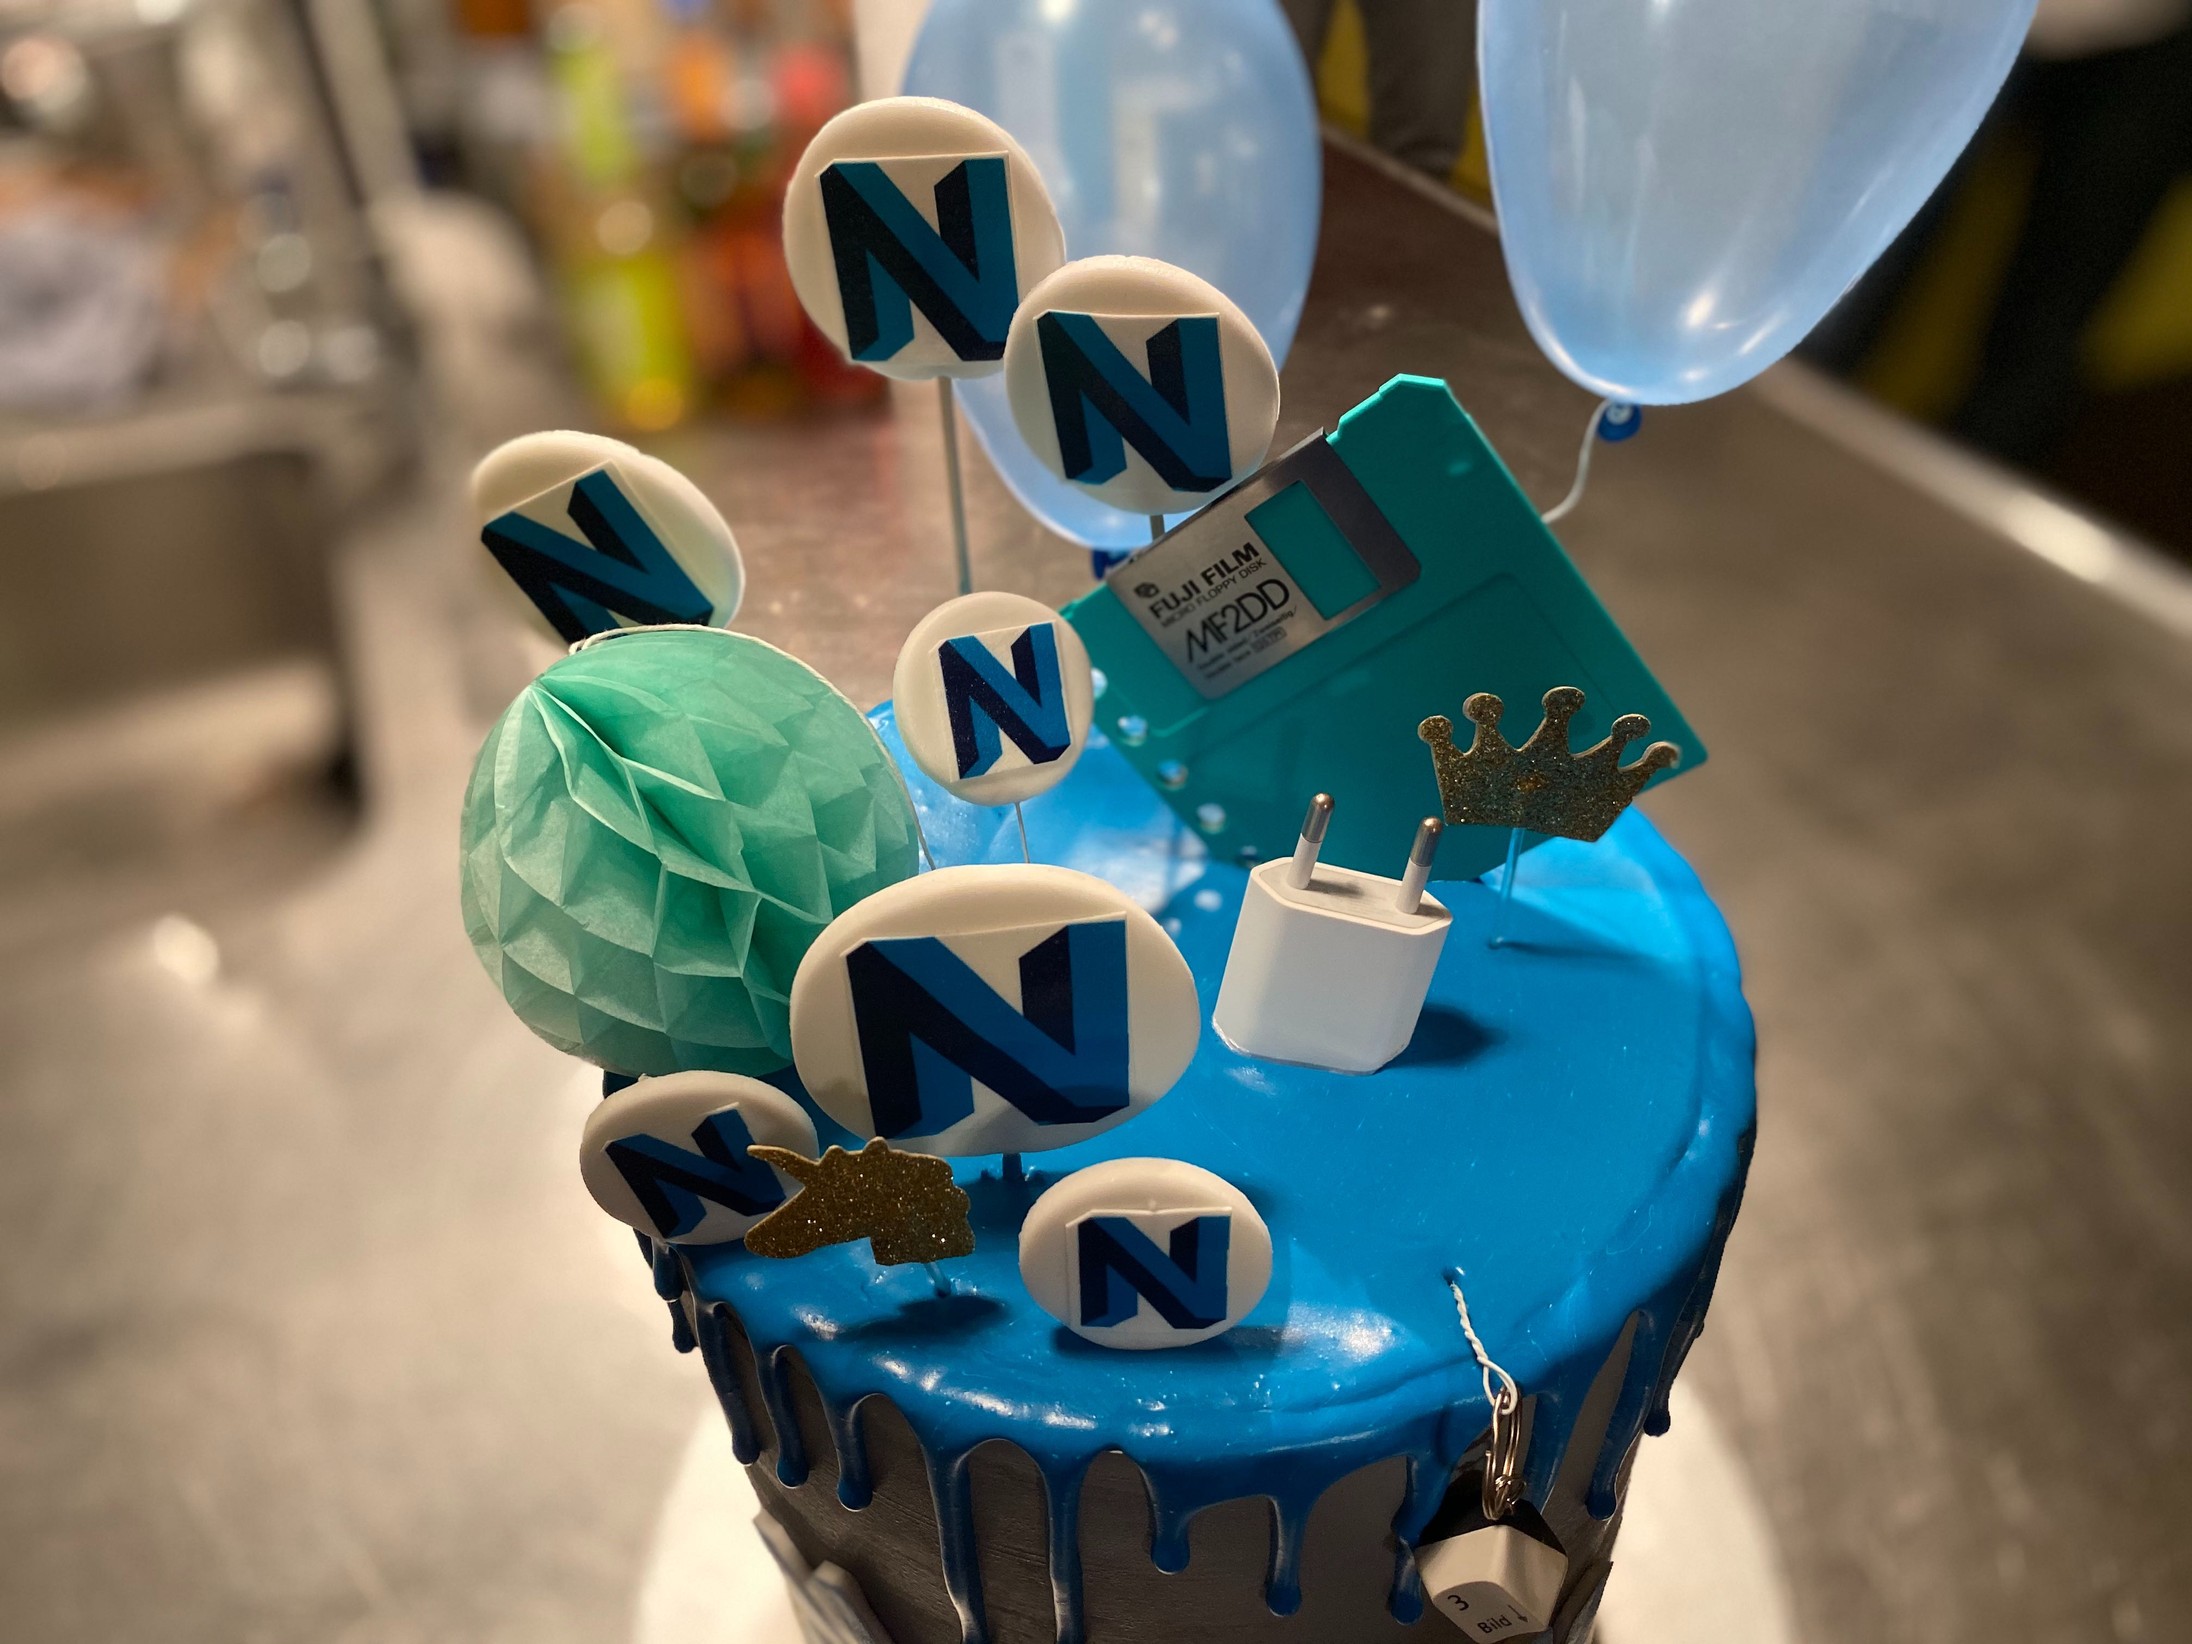 Cake with Neos logos, a phone charger and disk